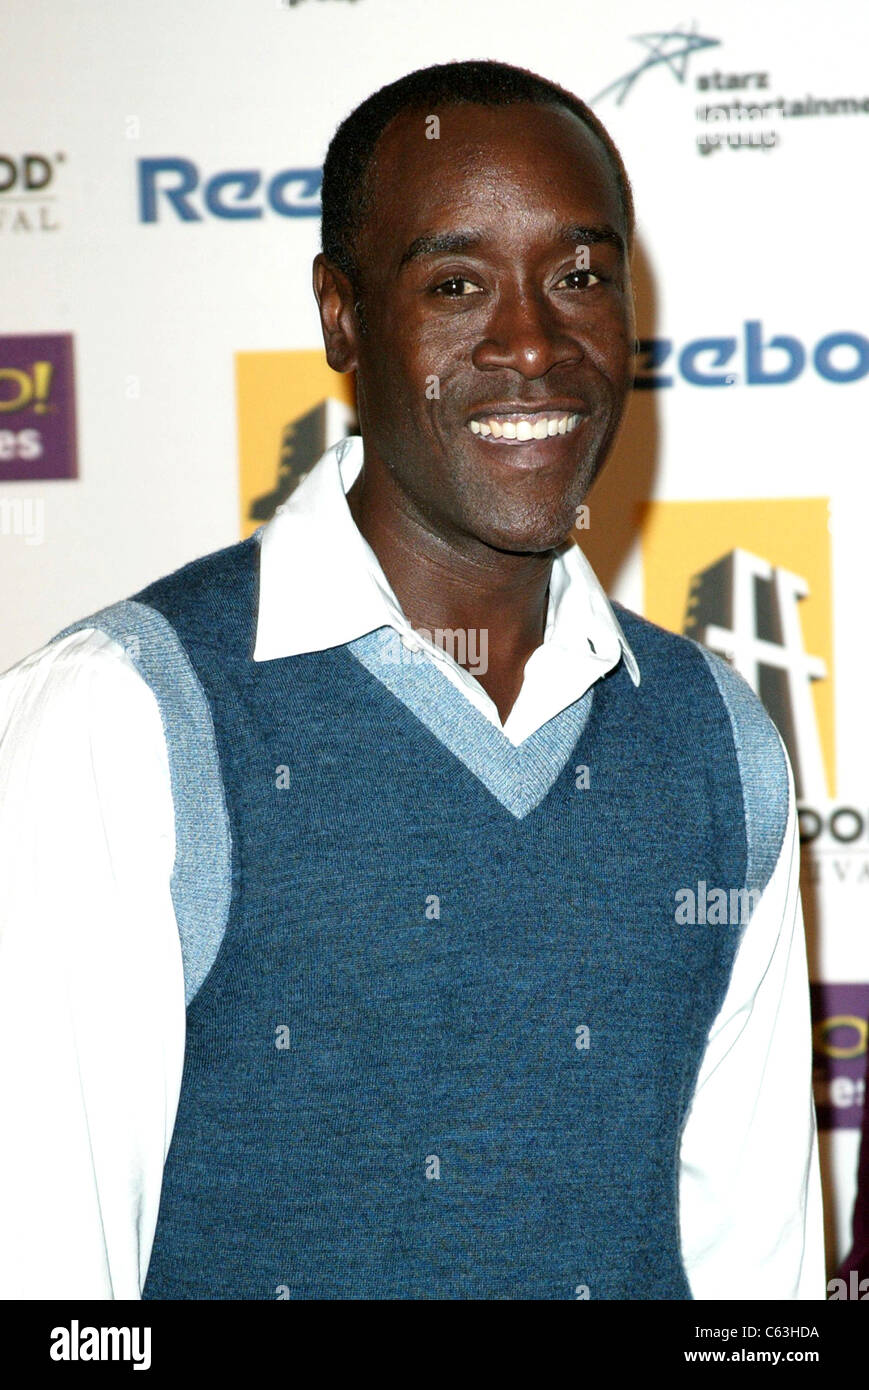 Don Cheadle at arrivals for 9th ANNUAL HOLLYWOOD FILM FESTIVAL HOLLYWOOD AWARDS, Beverly Hilton Hotel, Los Angeles, CA, October 24, 2005. Photo by: Jeremy Montemagni/Everett Collection Stock Photo